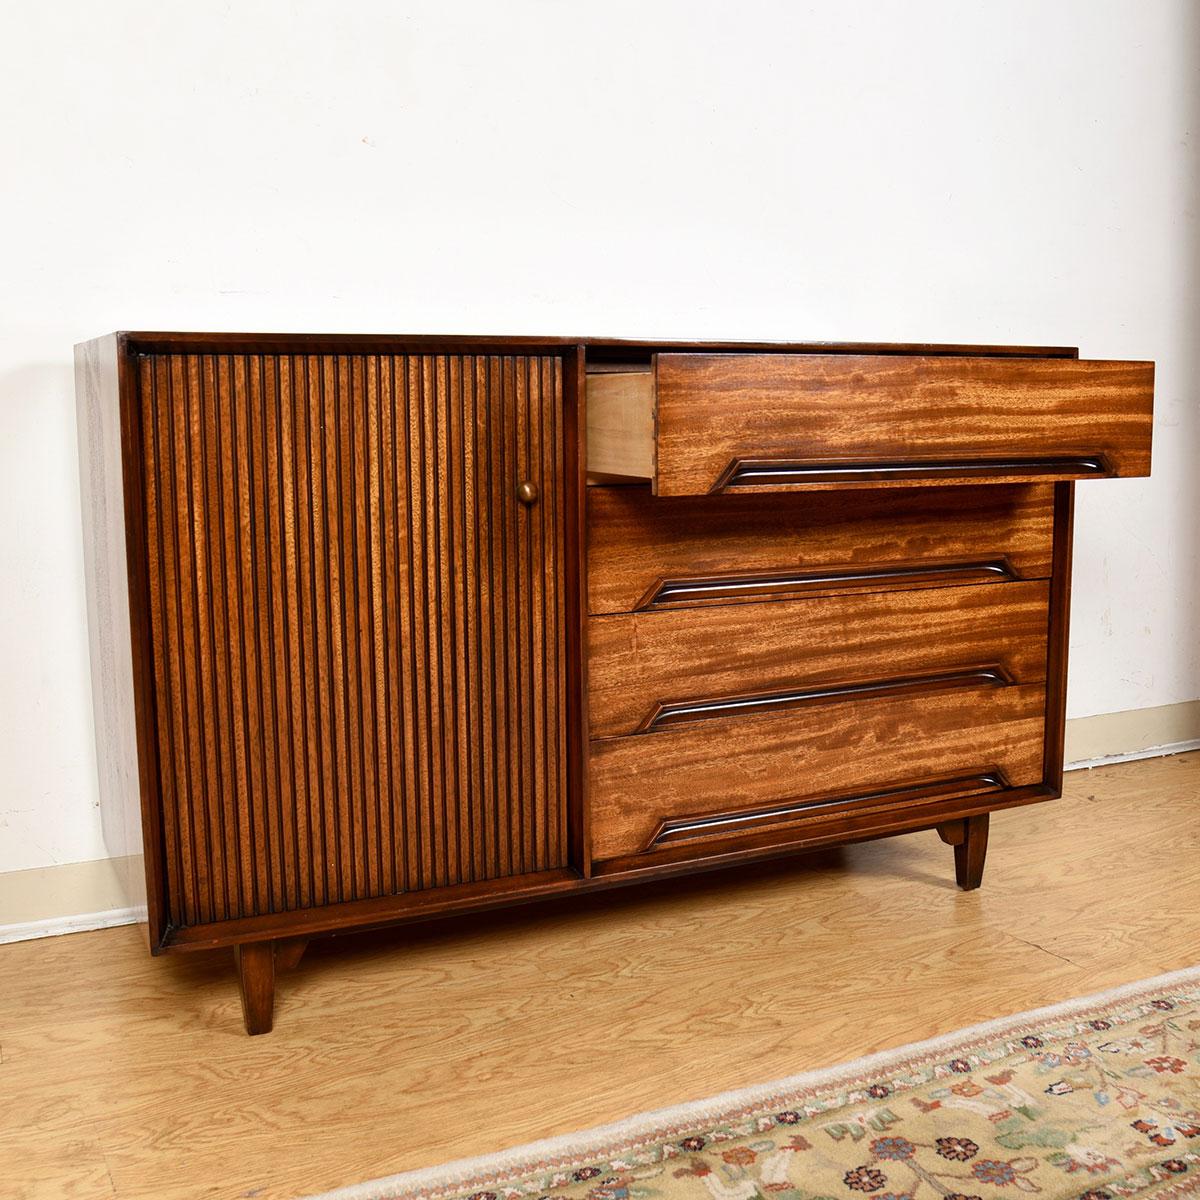 Exotic Mindoro Wood Cabinet by Milo Baughman for Drexel Perspective, 1951 In Excellent Condition For Sale In Kensington, MD